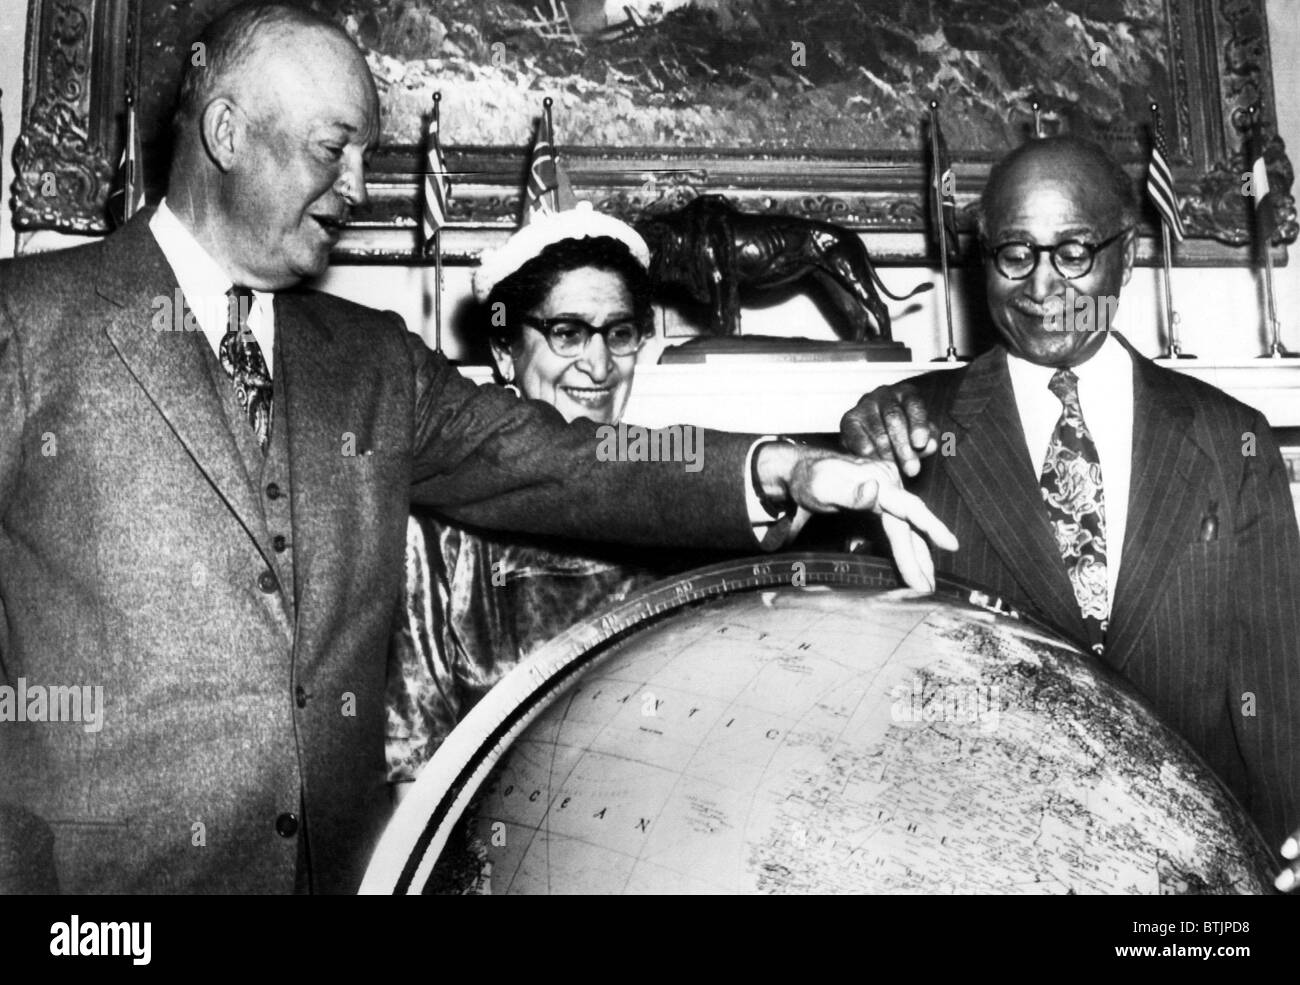 During a visit to the White House, Explorer Matt Henson helps President Eisenhower locate the spot on a globe where he reached t Stock Photo